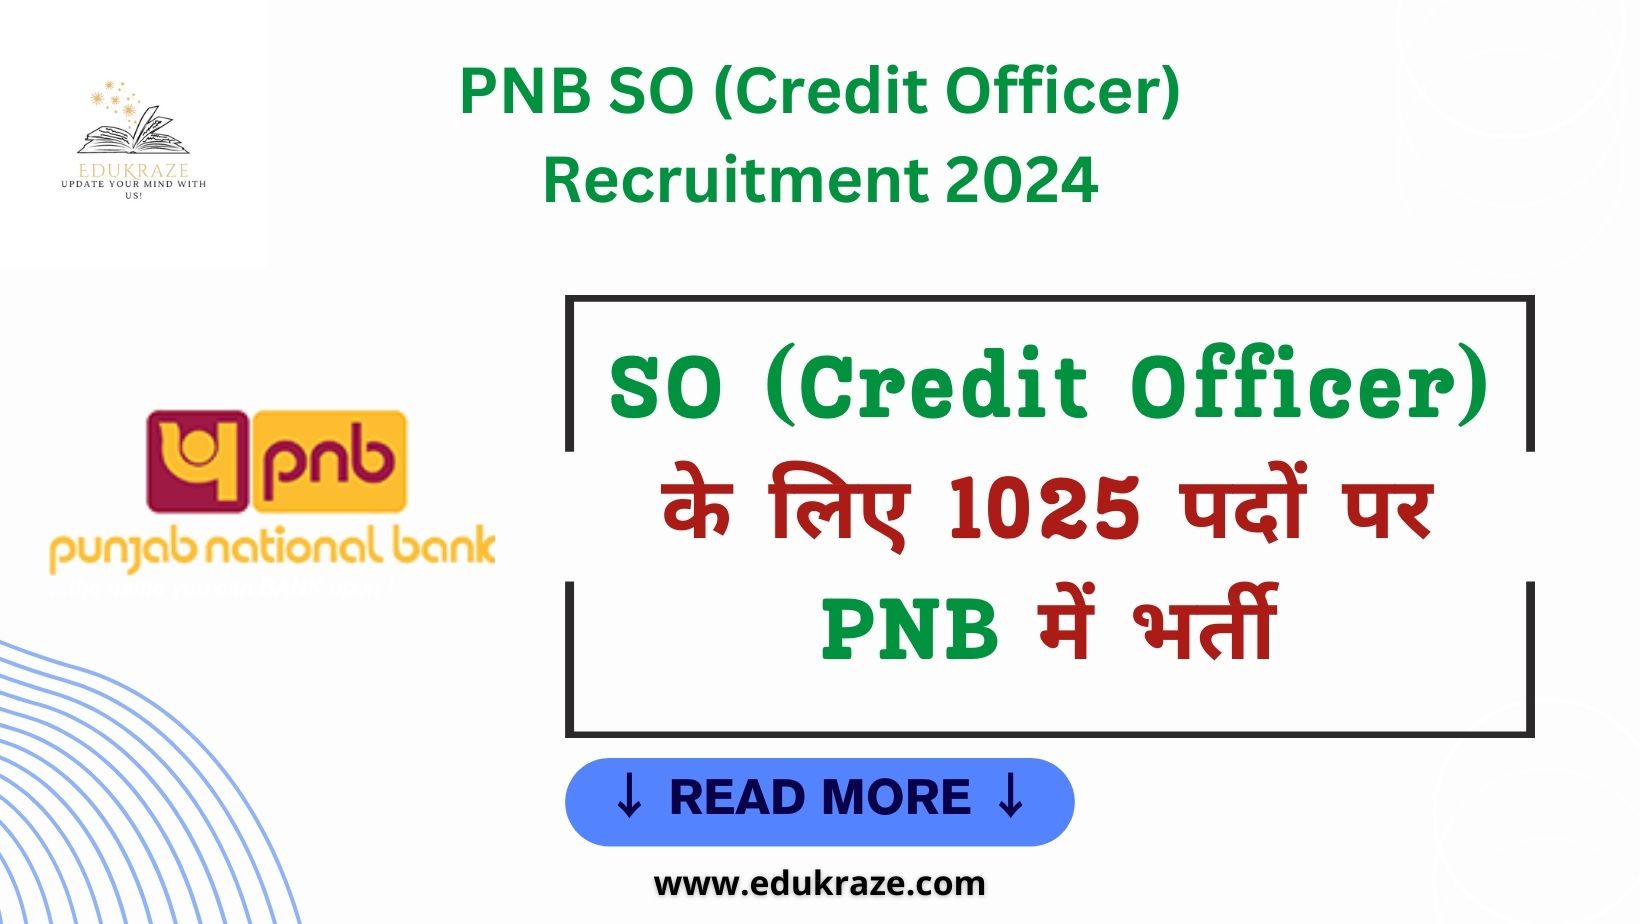 PNB SO (Credit Officer) Recruitment 2024 Out for 1025 Post